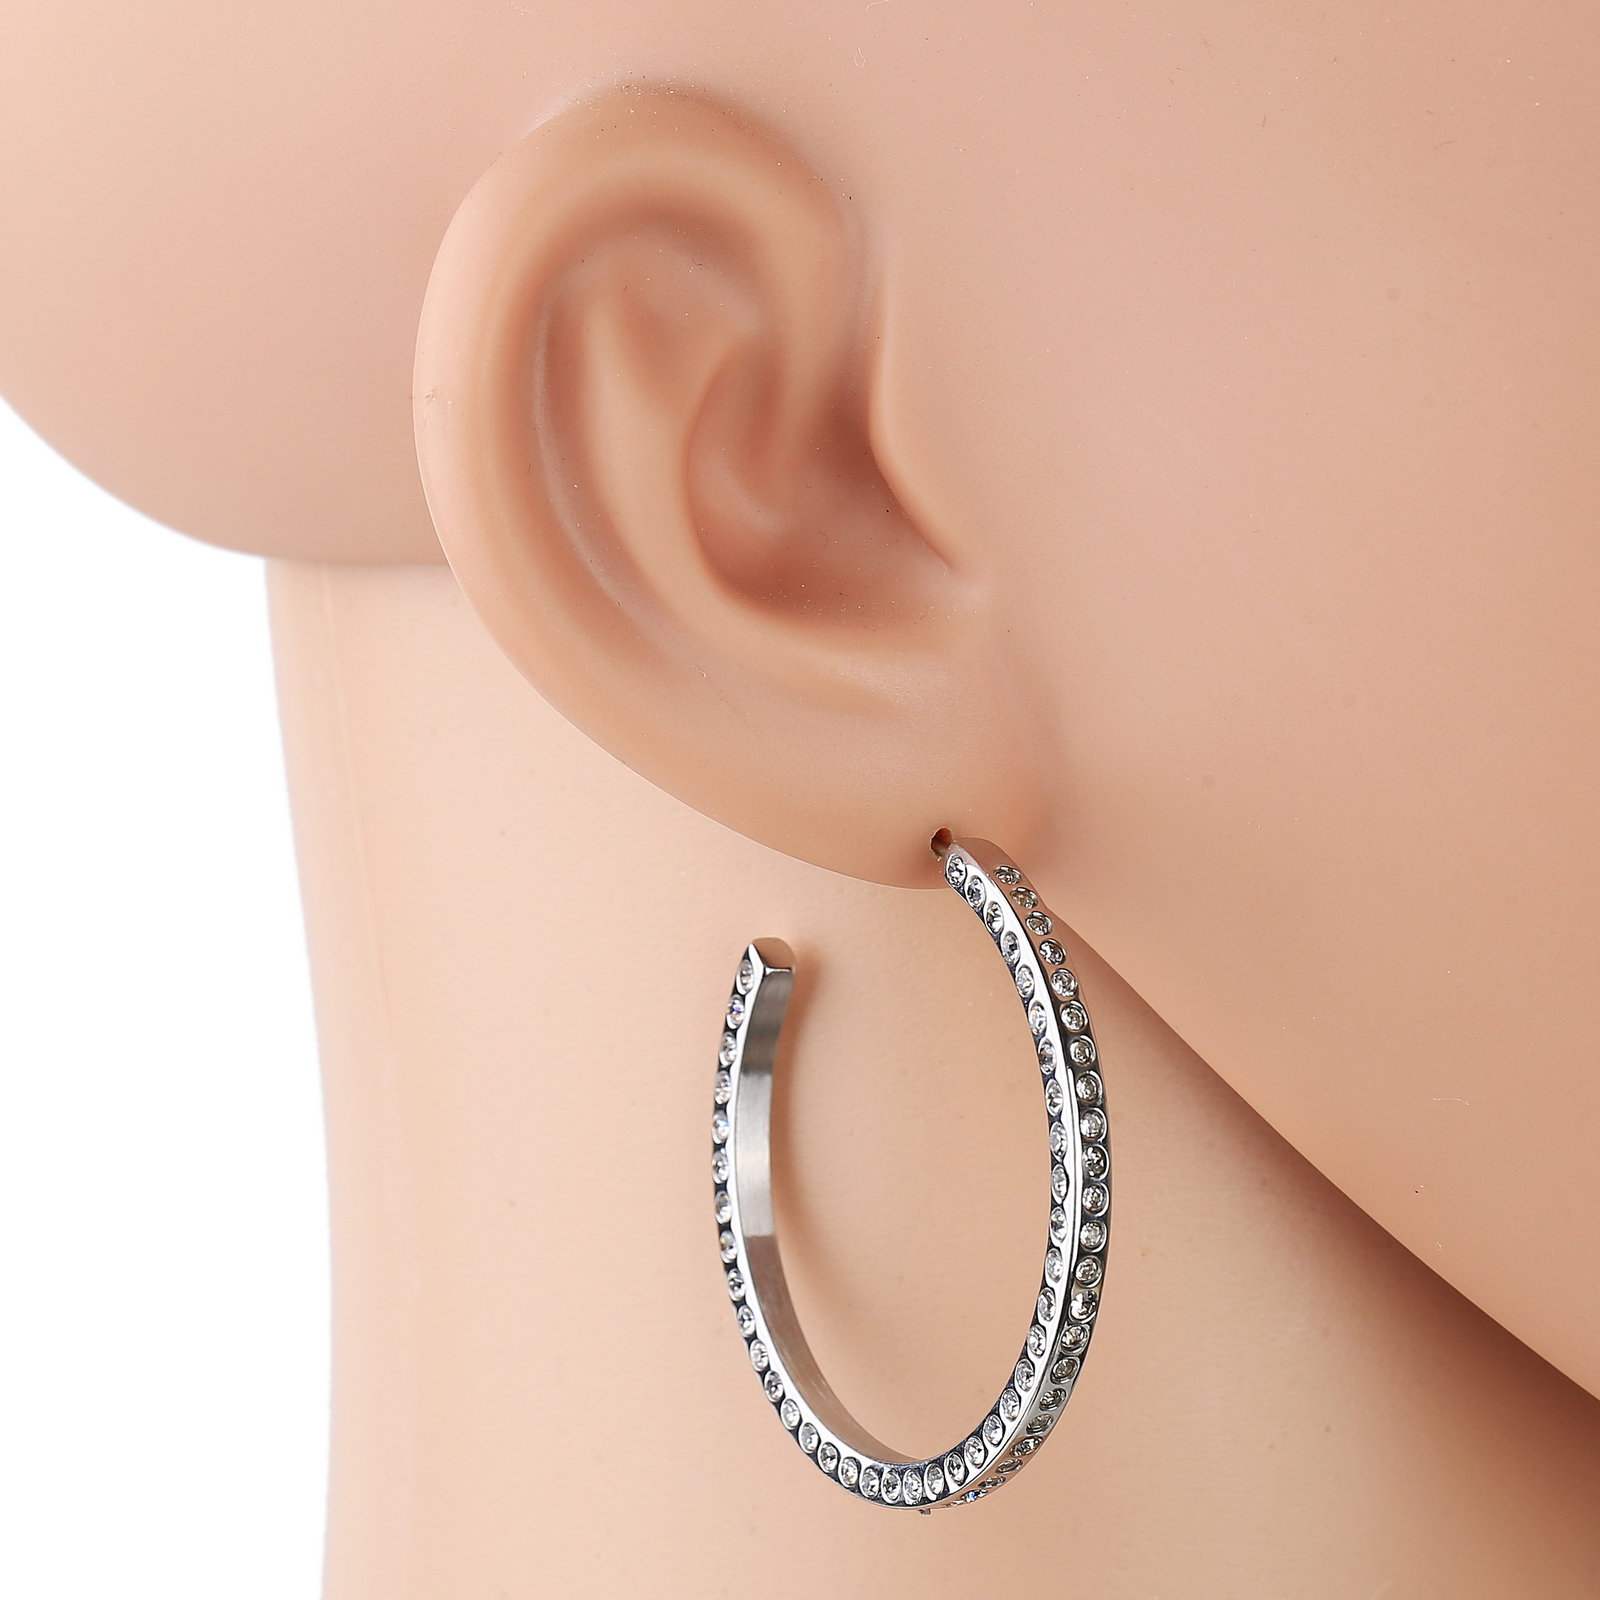 silver tone hoop earrings with dazzling swarovski style crystals